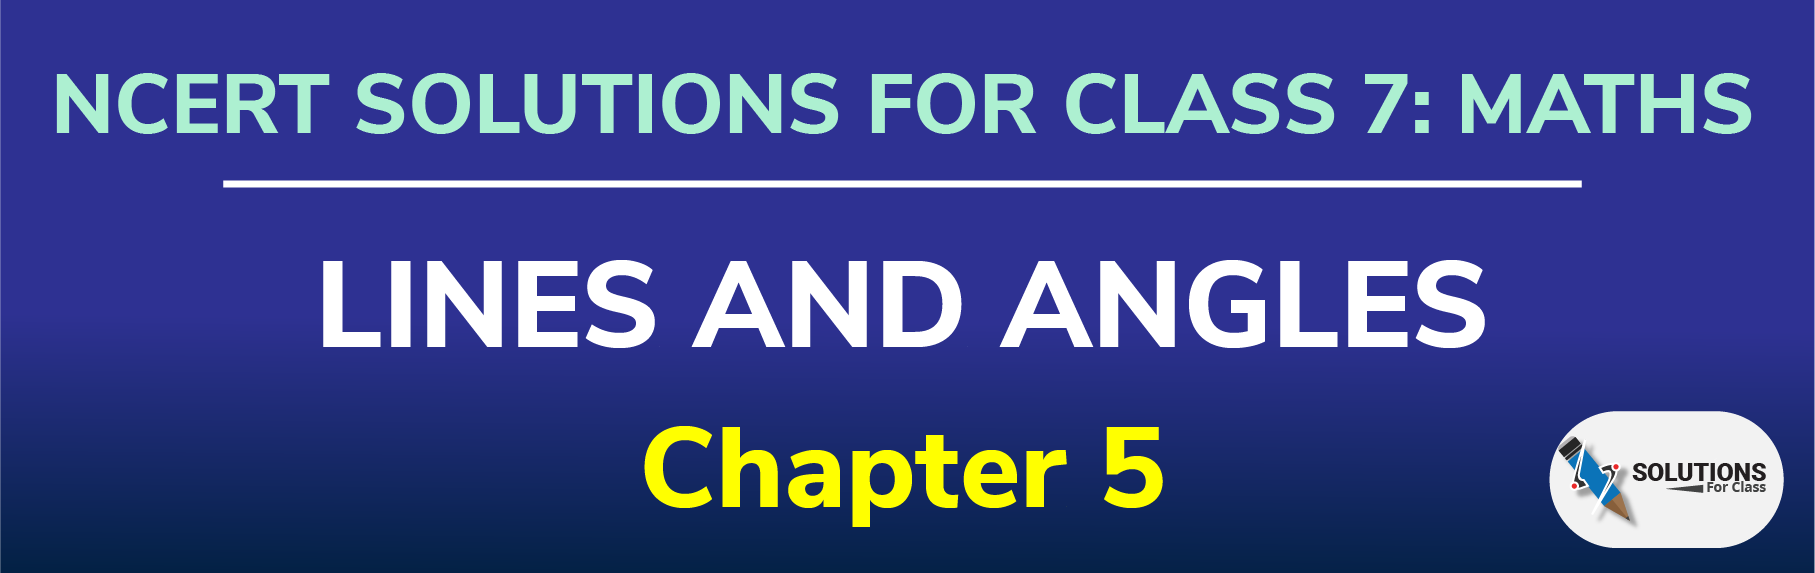 NCERT Solutions for Class 7, Maths, Chapter 5, Lines and Angles